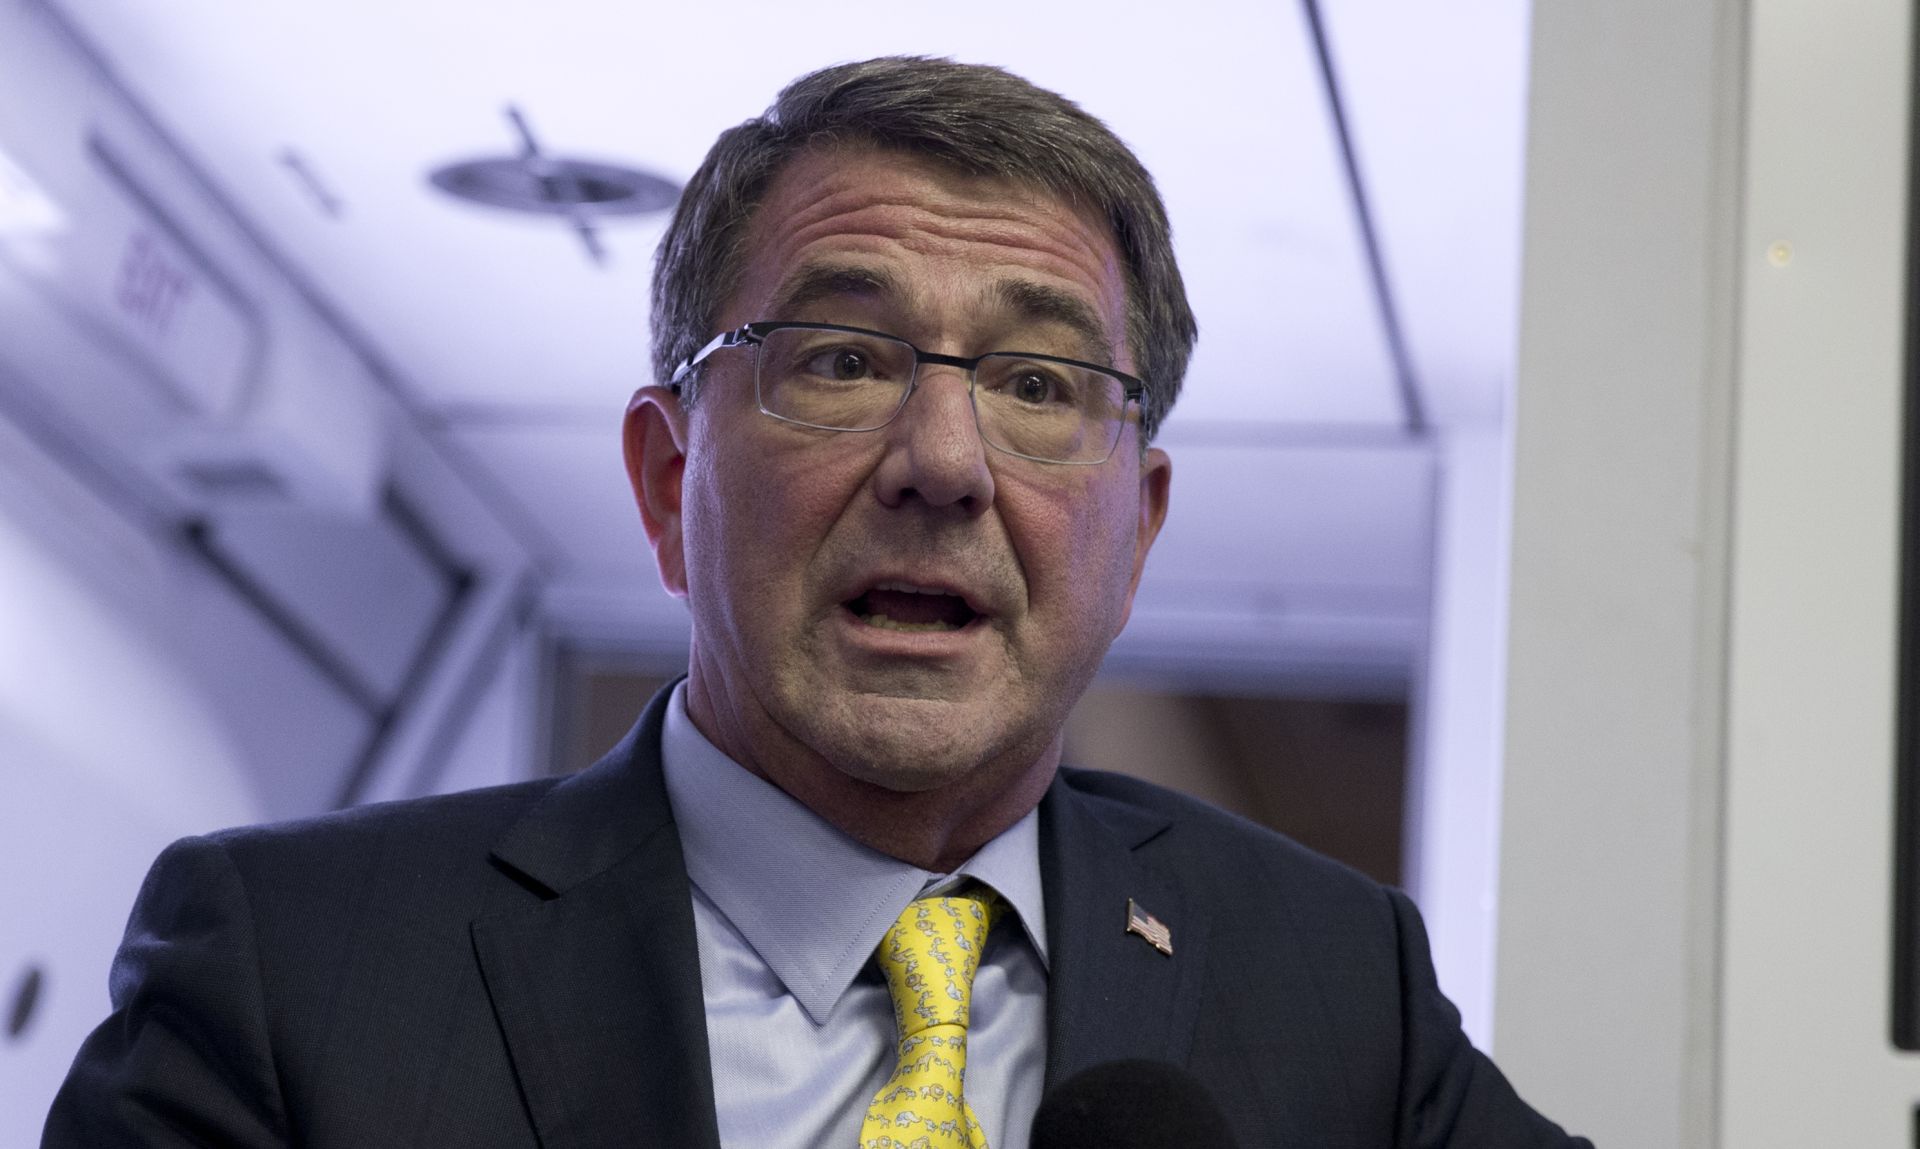 JEDDA, SAUDI ARABIA - JULY 22:  U.S. Defense Secretary Ash Carter speaks with media on a military aircraft after departing on July 22, 2015 in Jedda, Saudi Arabia. While in Jiddah Carter met with Saudi Arabian King Salman bin Abdul Aziz and other Saudi officials. (Photo by Carolyn Kaster - Pool/Getty Images)